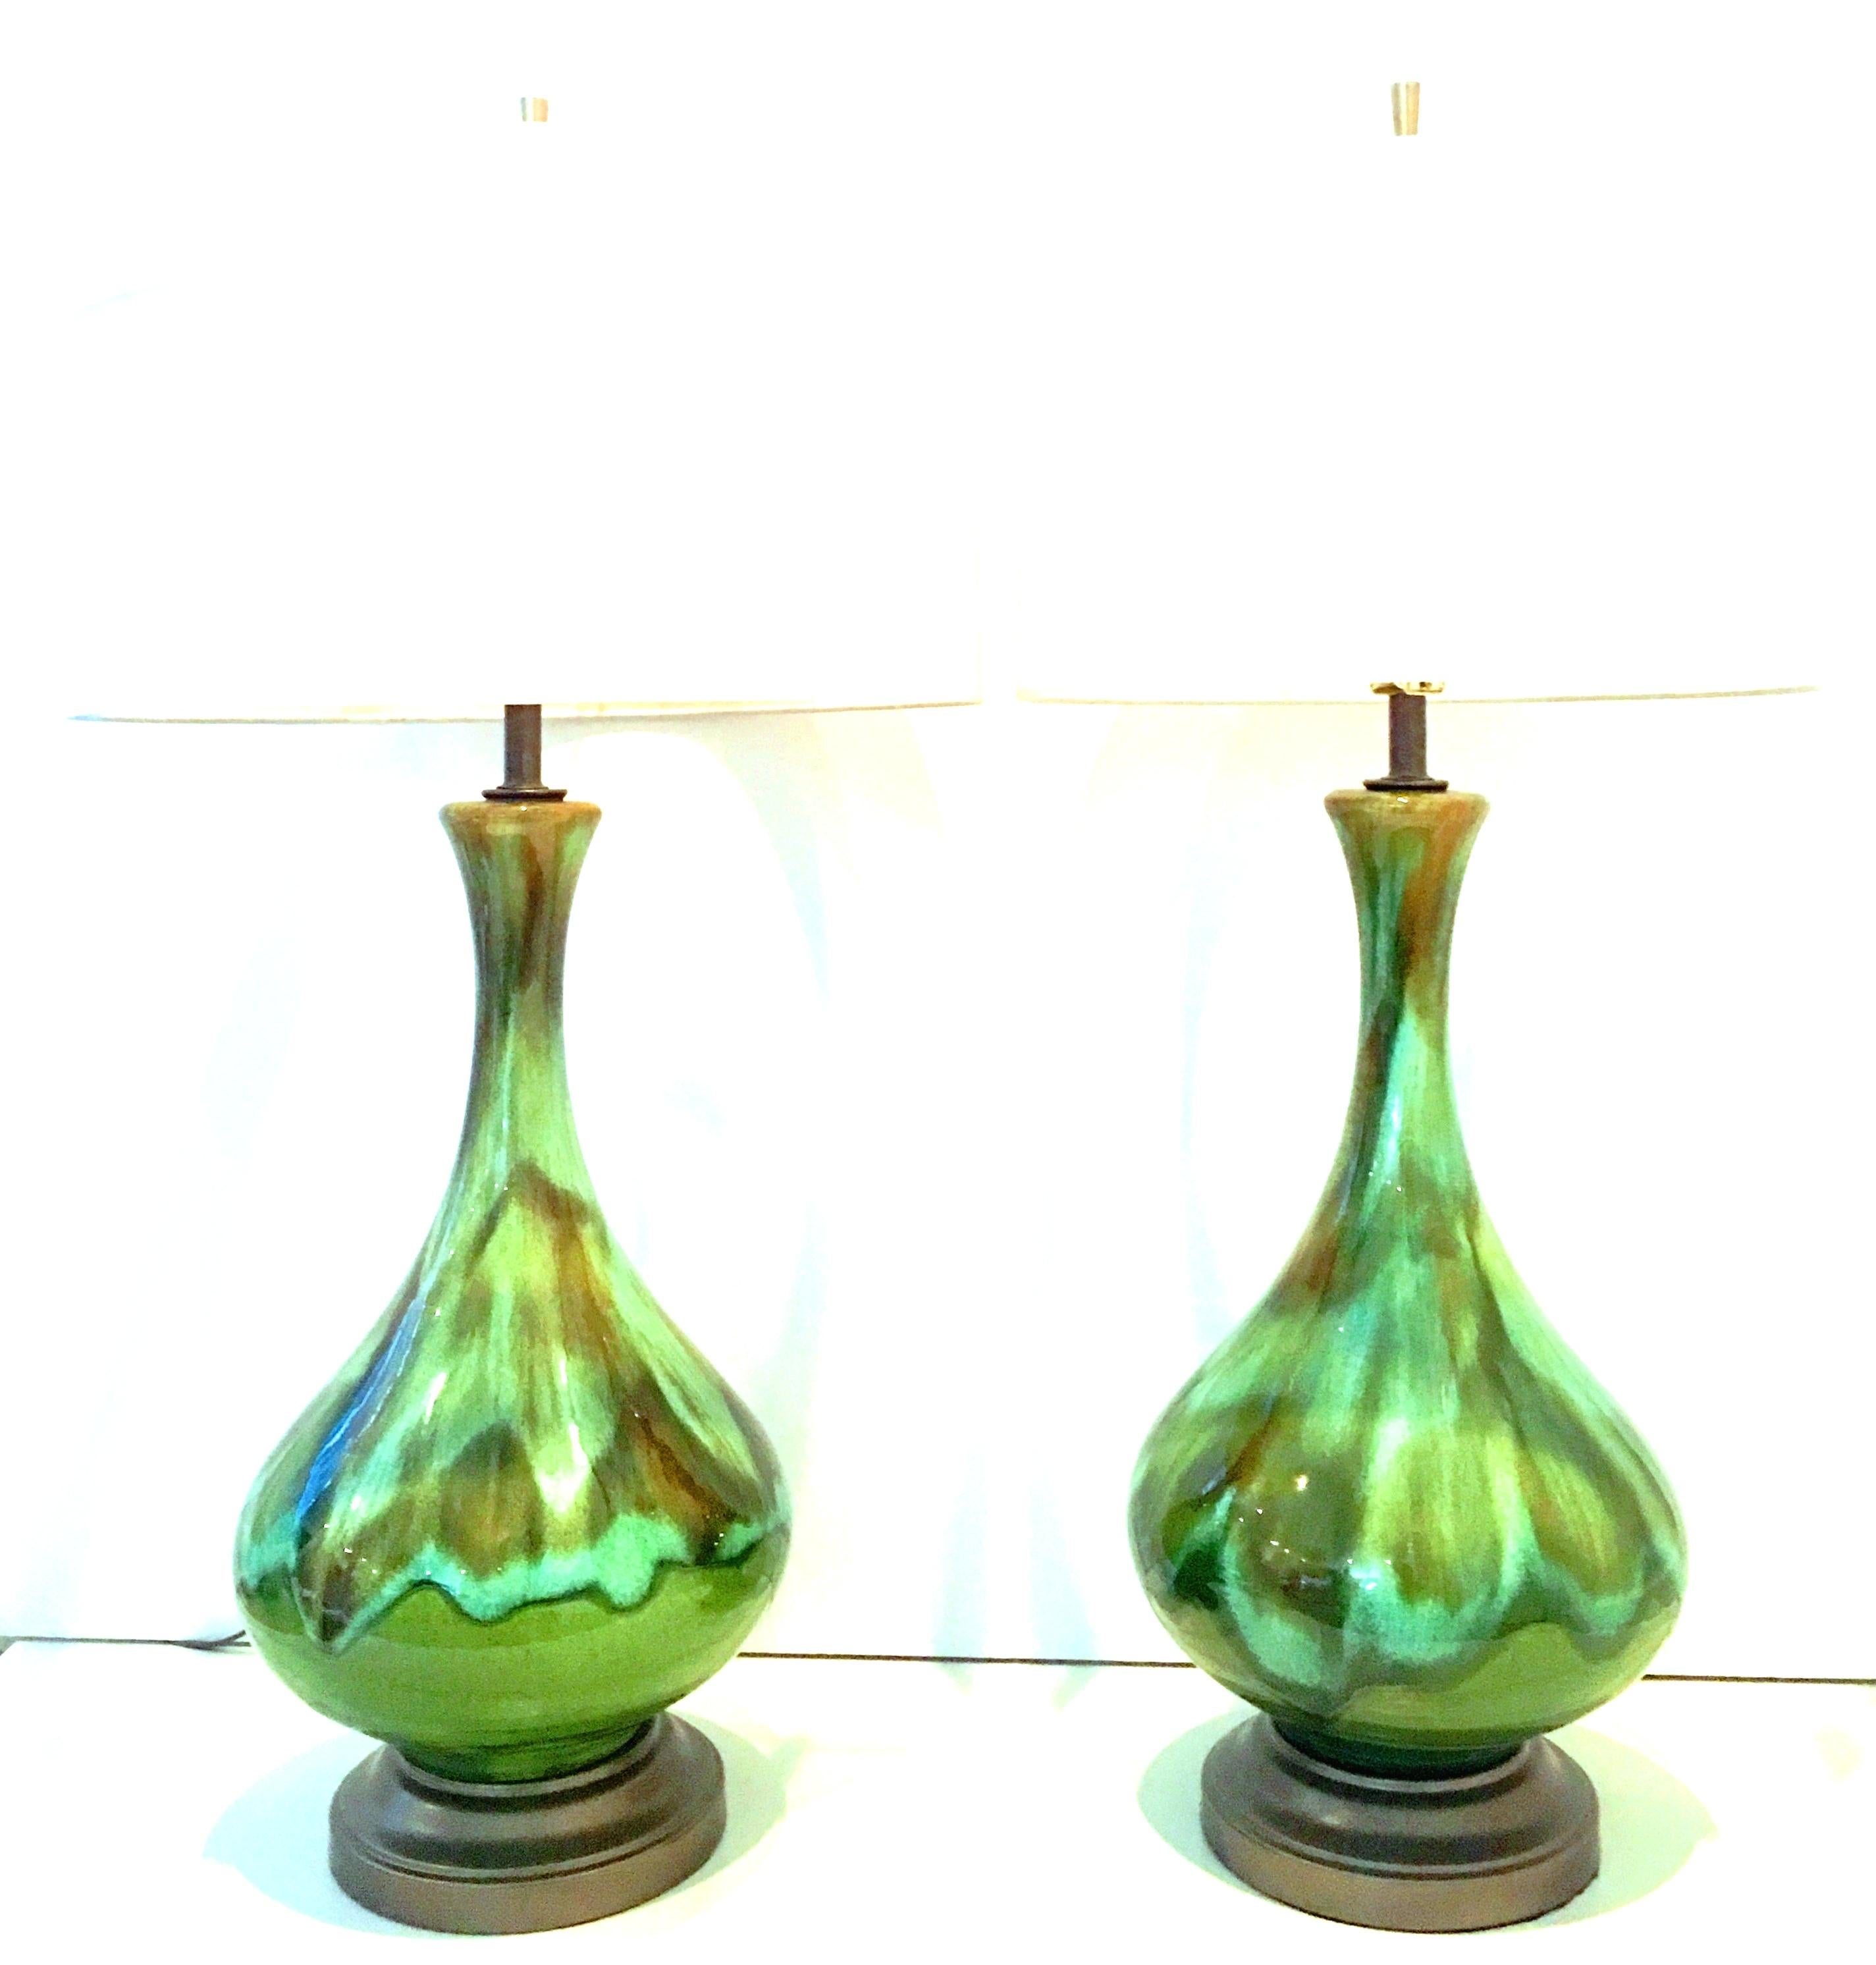 Mid-Century Modern pair of American ceramic drip glaze and brass table lamps. This pair of ceramic lamps features an avocado green ground with turquoise, brown and shades of green. Original brass fittings, newly wired with brown cords. Includes a